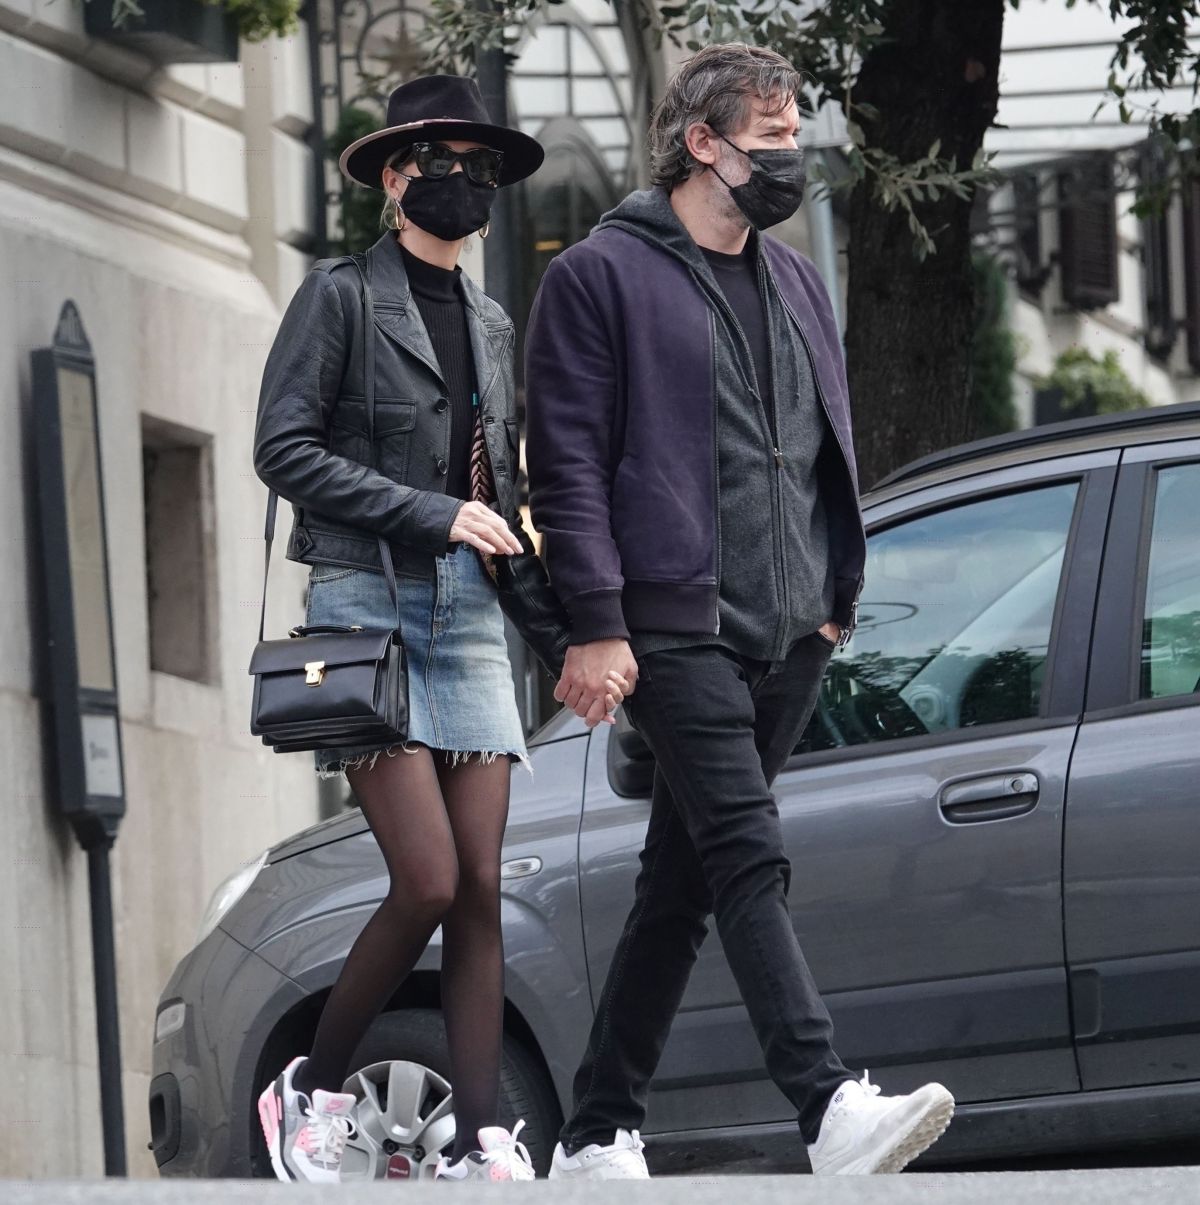 LAETICIA HALLYDAY and Jalil Lespert Out in Rome 11/02/2020 ...